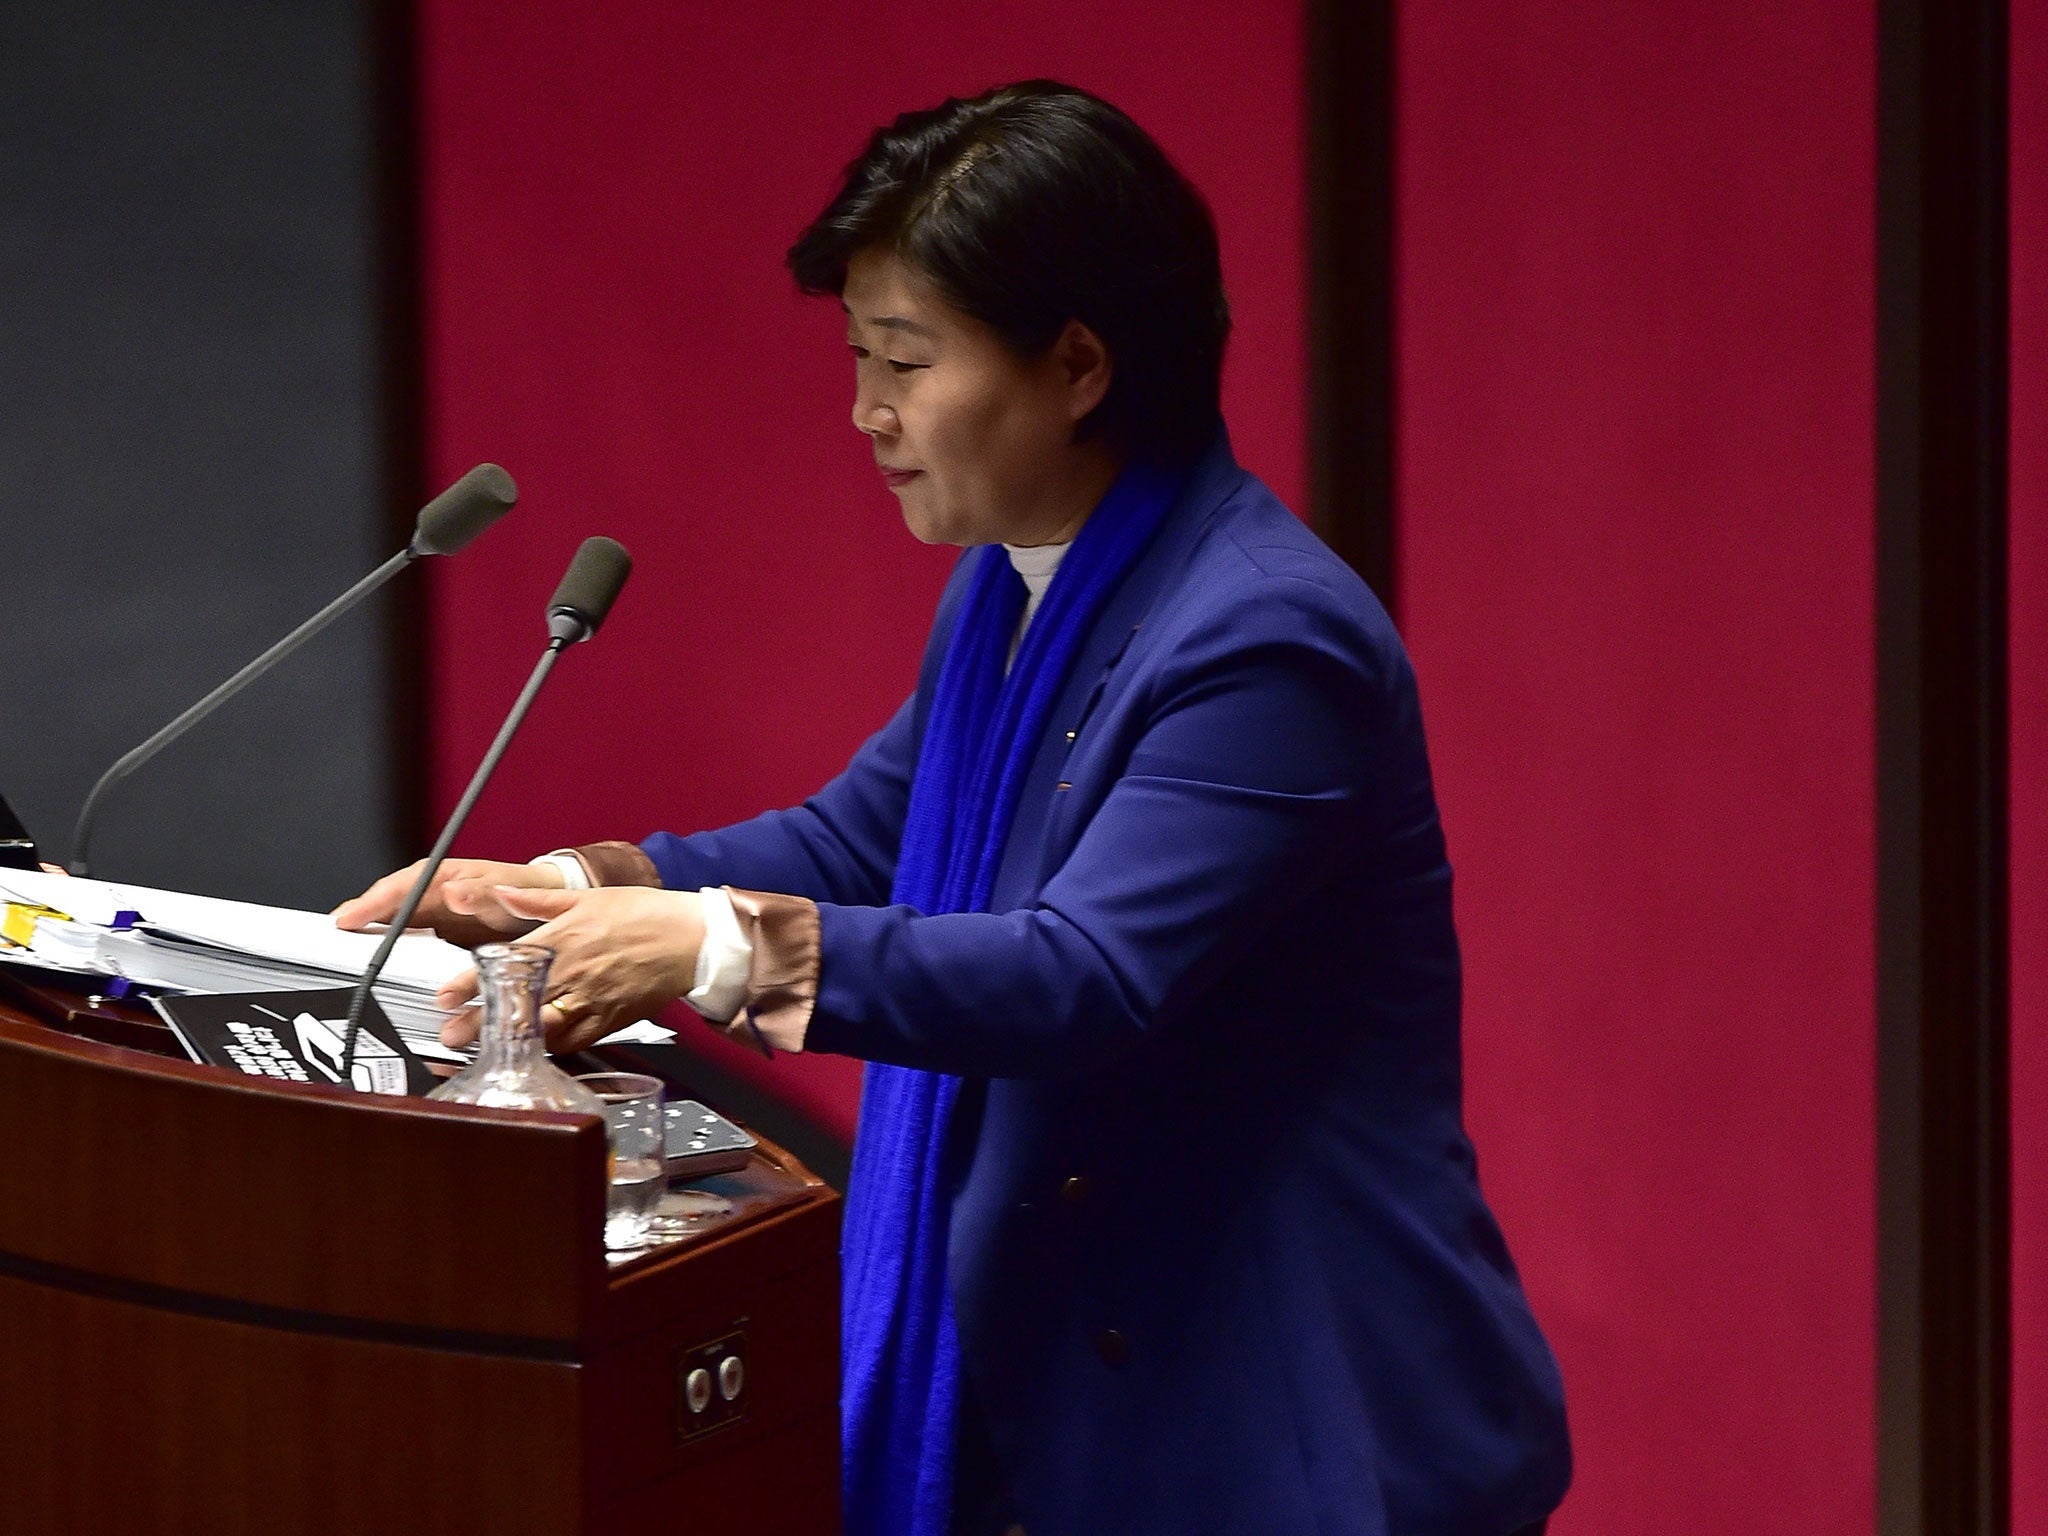 Seo Young-Kyo delivers a speech as part of the filibuster